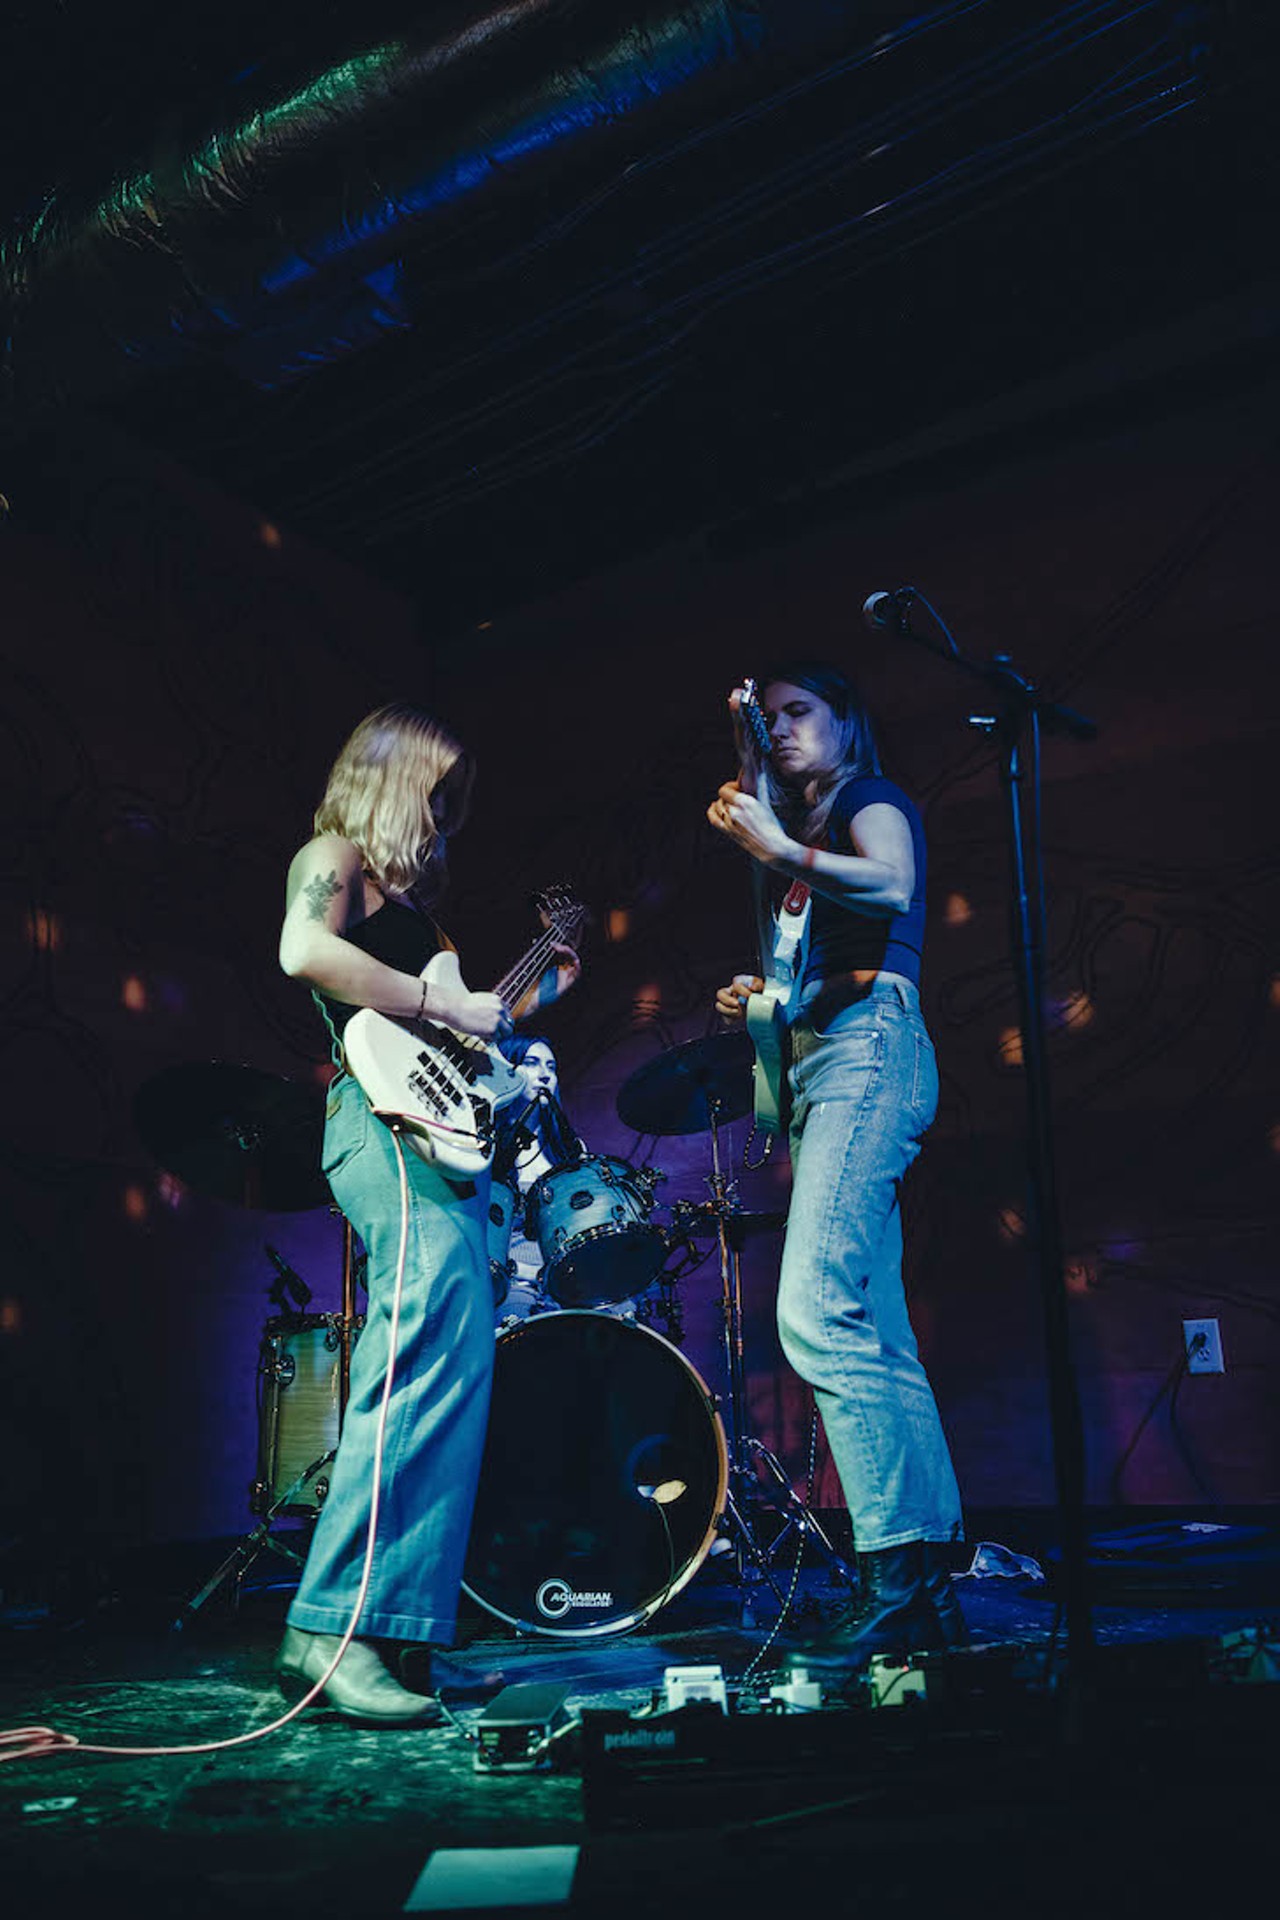 Photos of Sienna Queen and Ken Apperson playing Tampa&#146;s Hooch and Hive